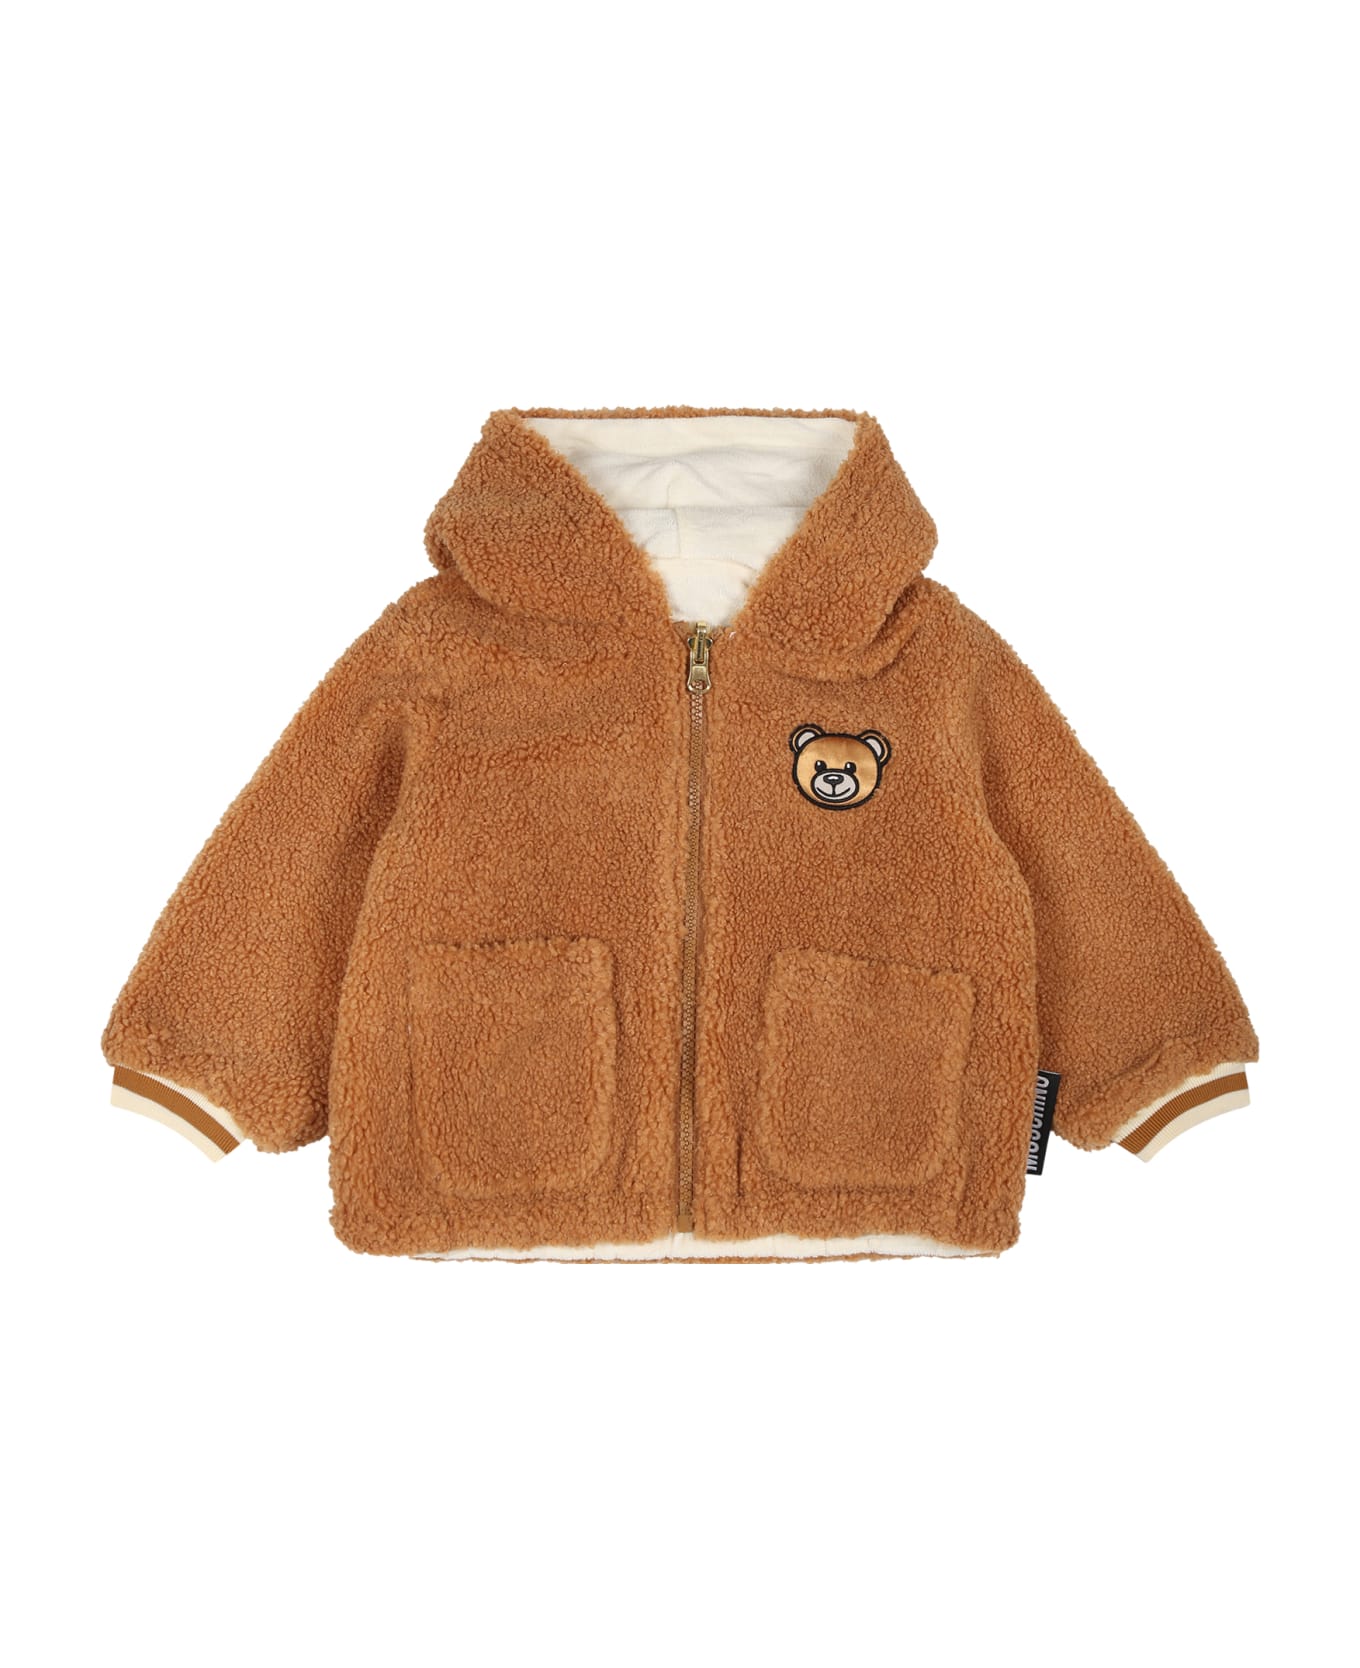 Moschino Brown Coat For Babykids With Teddy Bear - BEIGE